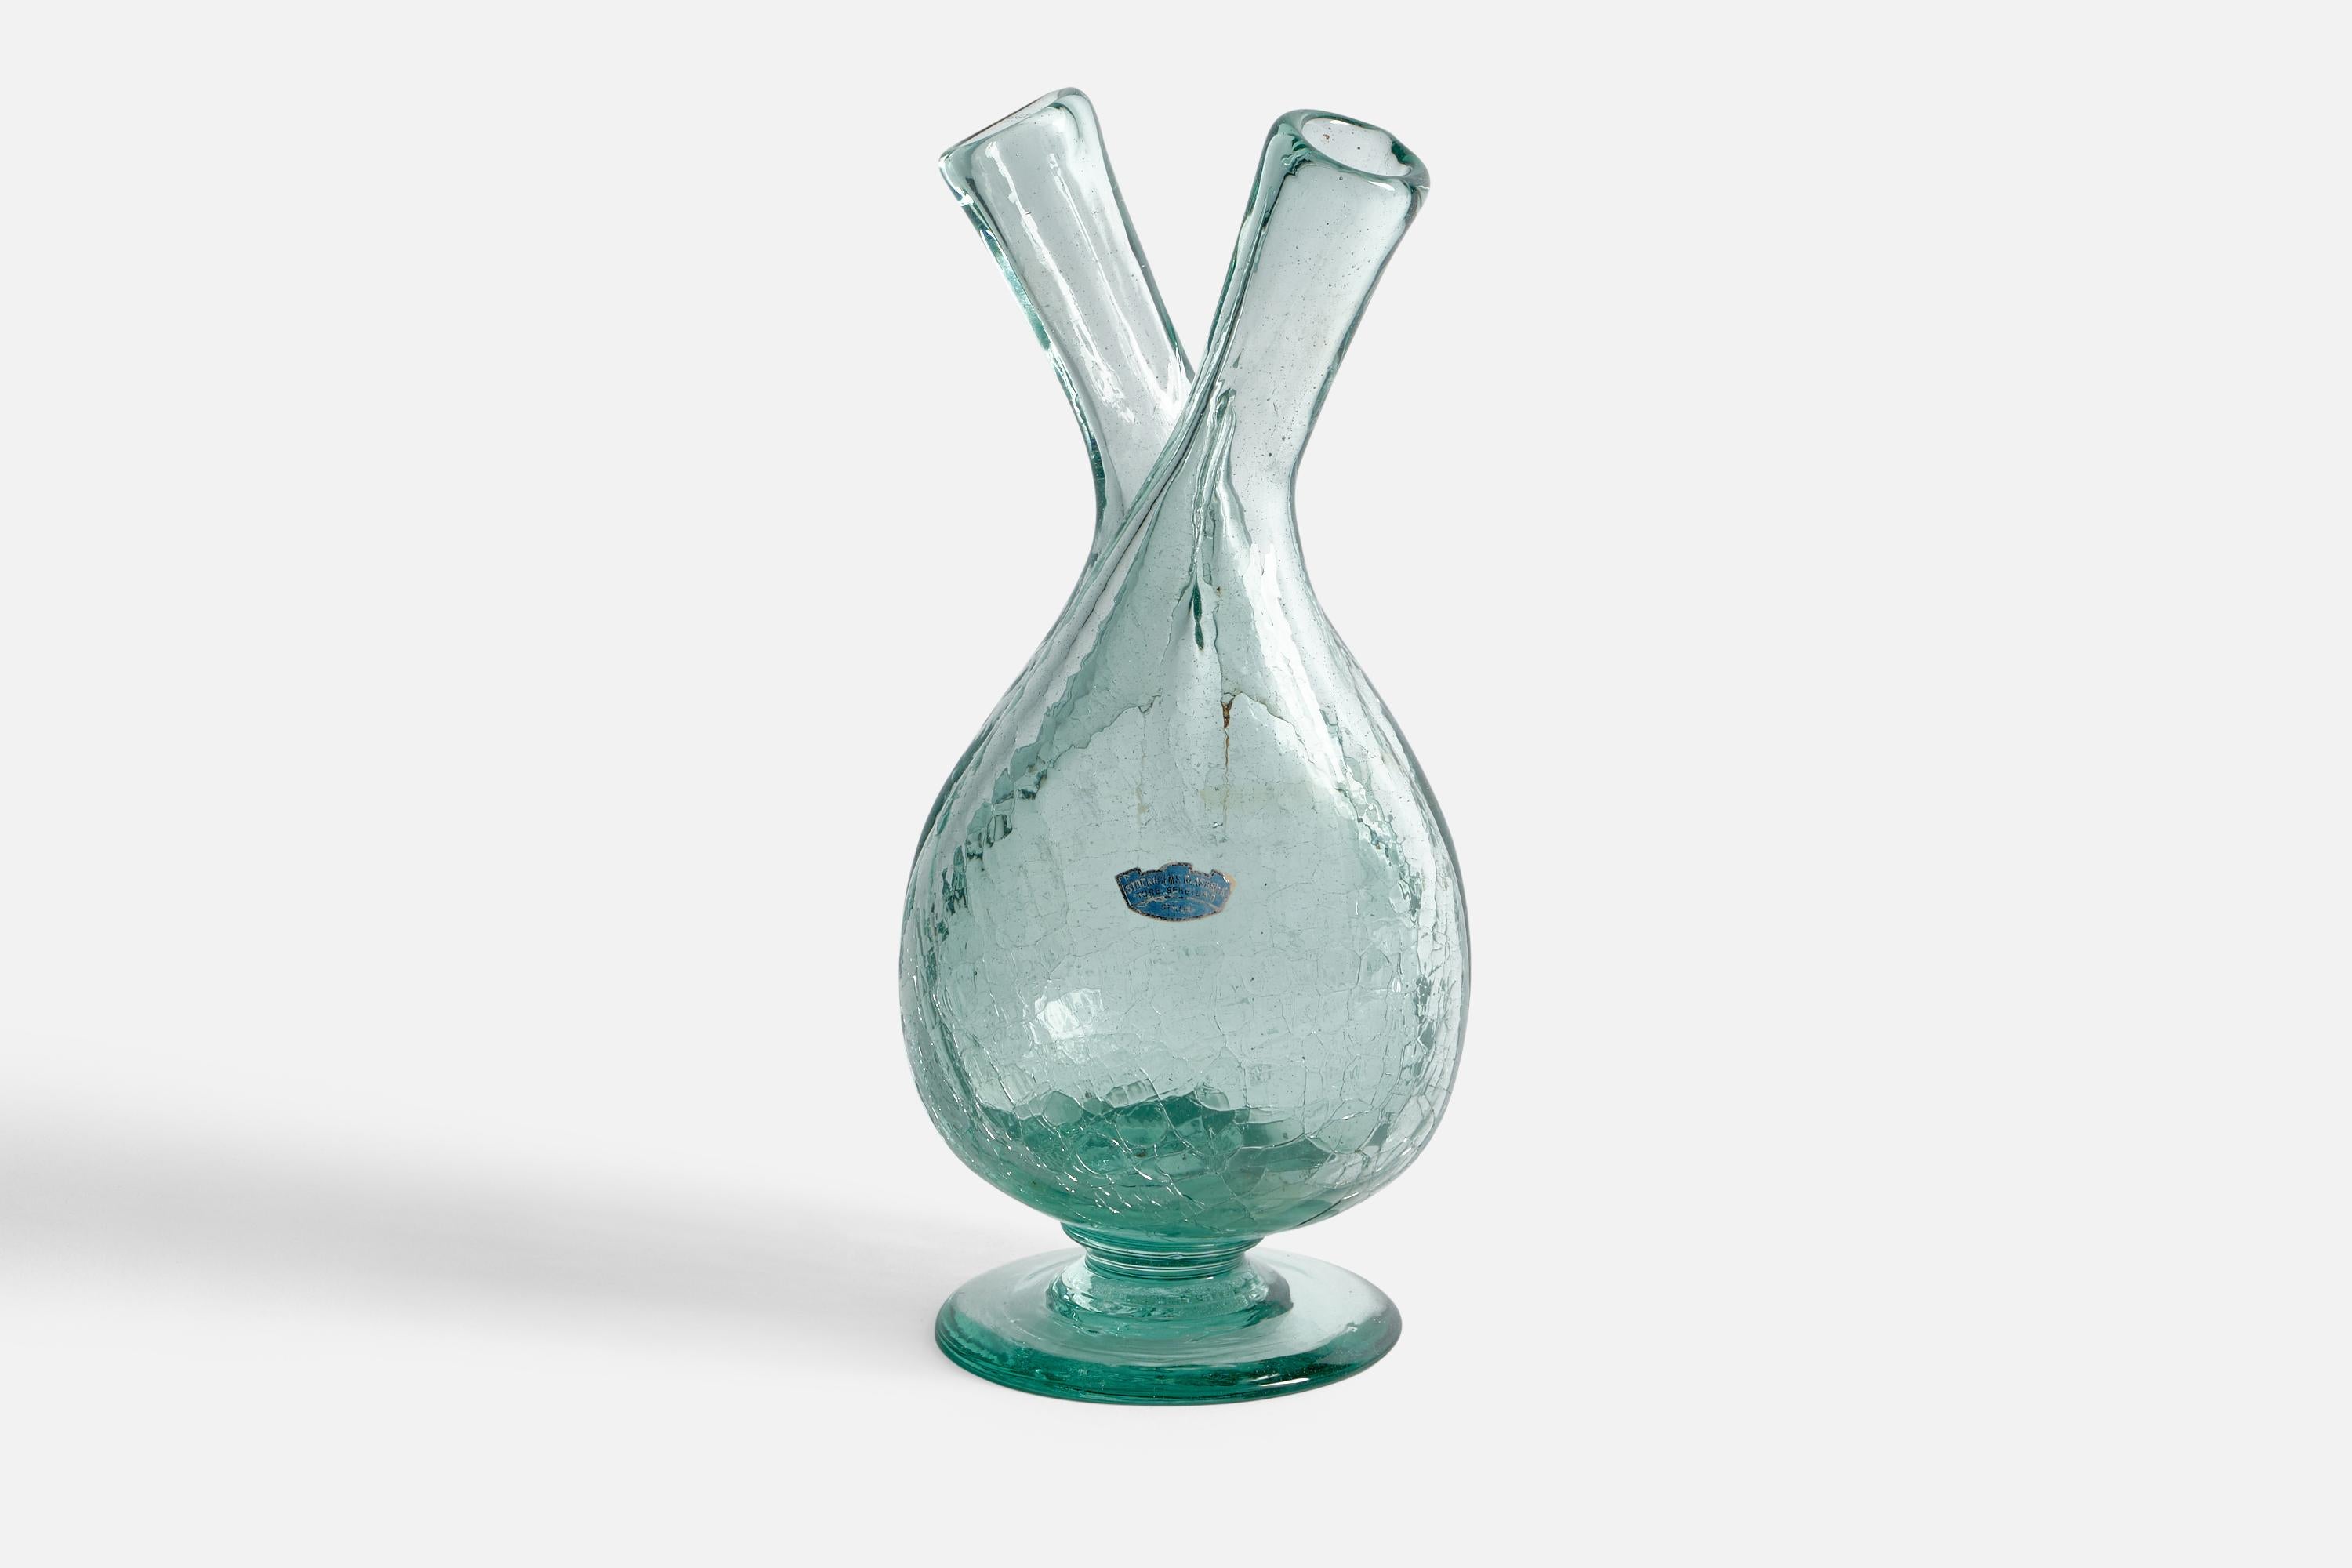 A blown glass bottle designed by Ture Berglund and produced by Skansens Glasbruk, Sweden, 1940s.